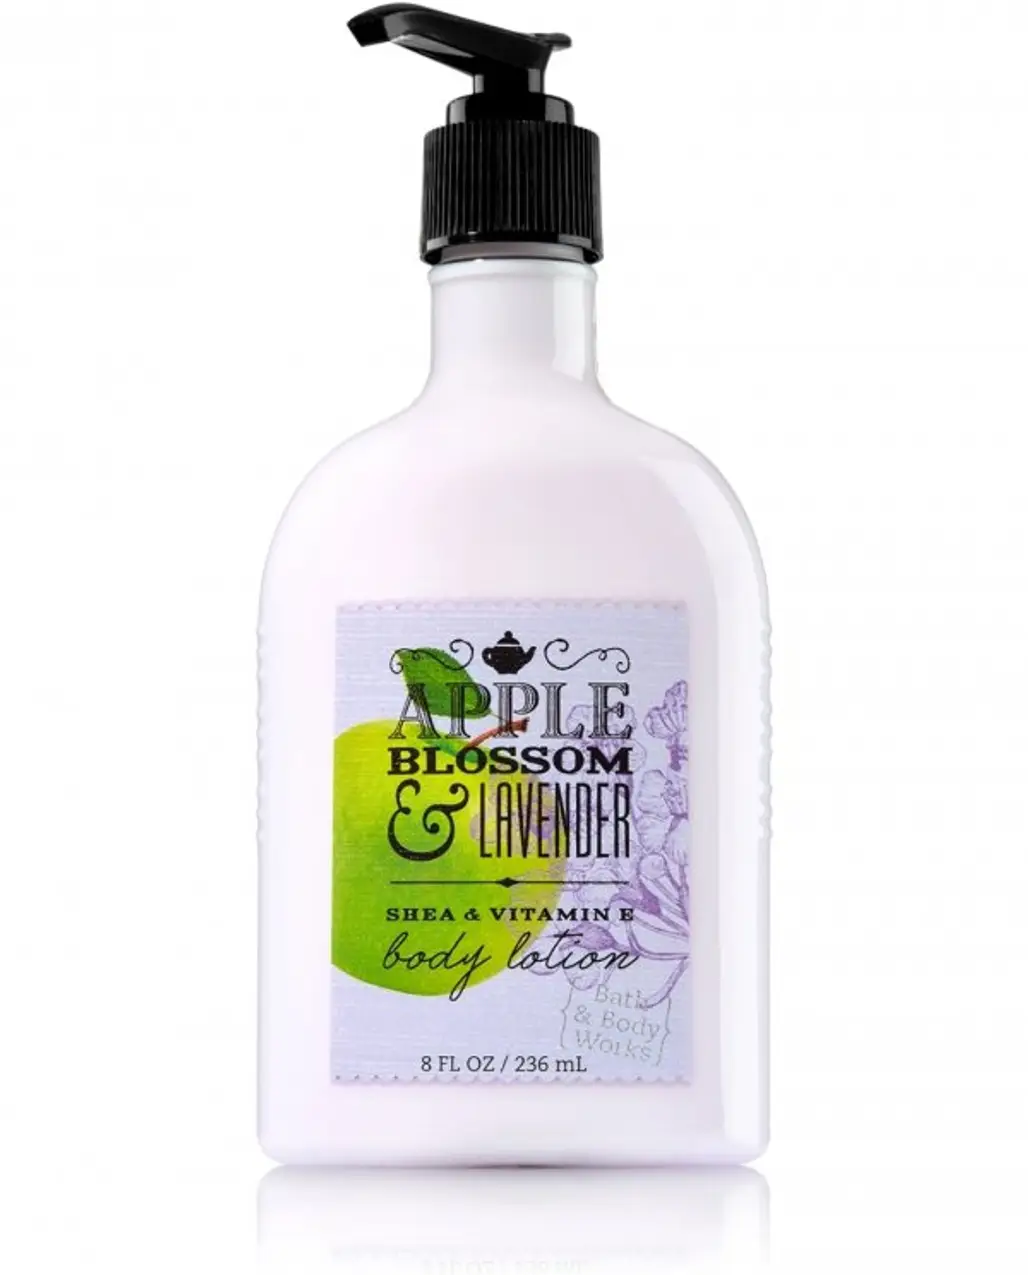 Apple Blossom and Lavender Body Lotion